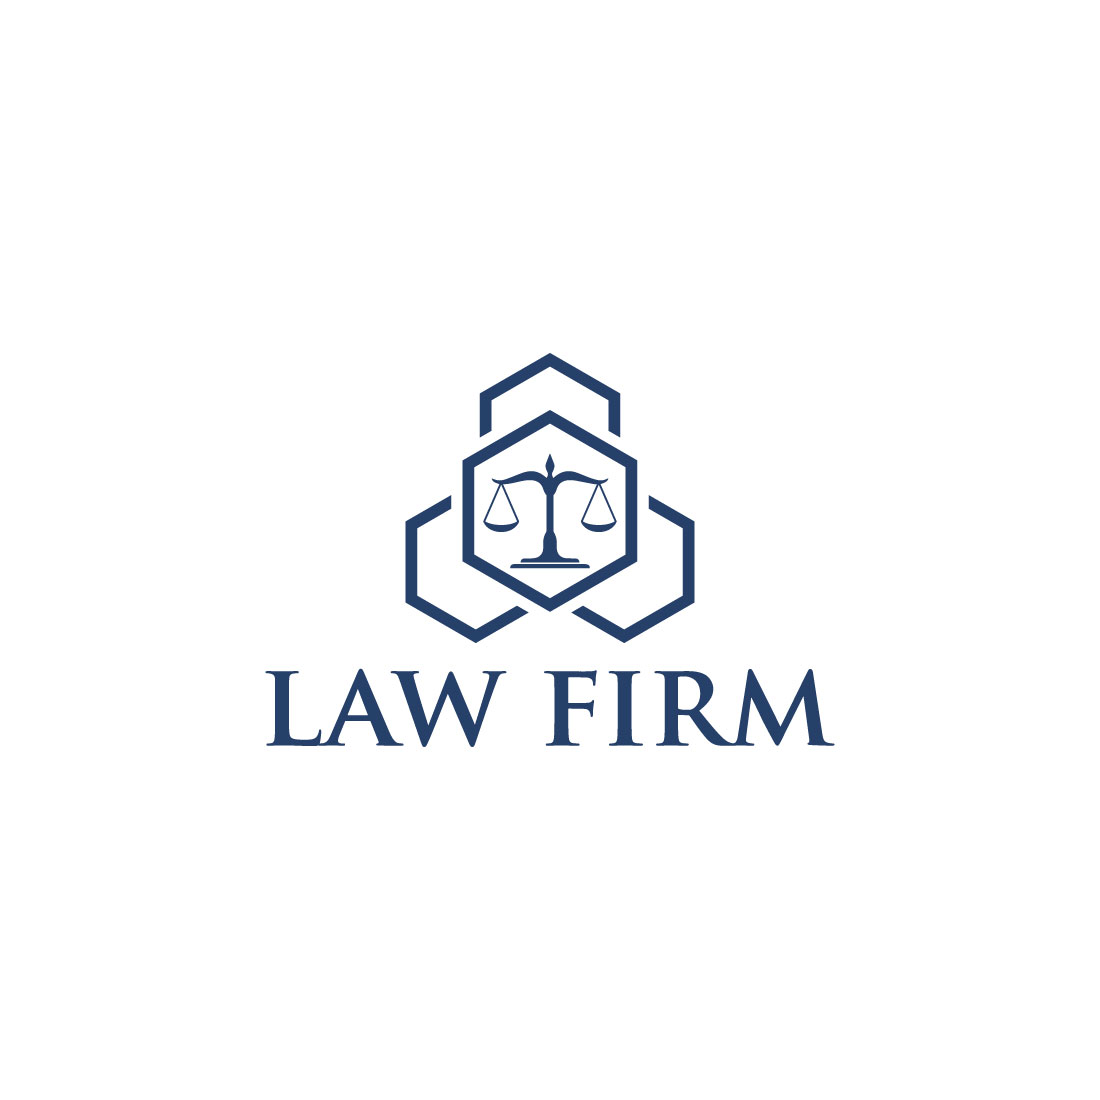 Law Firm Logo Vector Design Template main cover